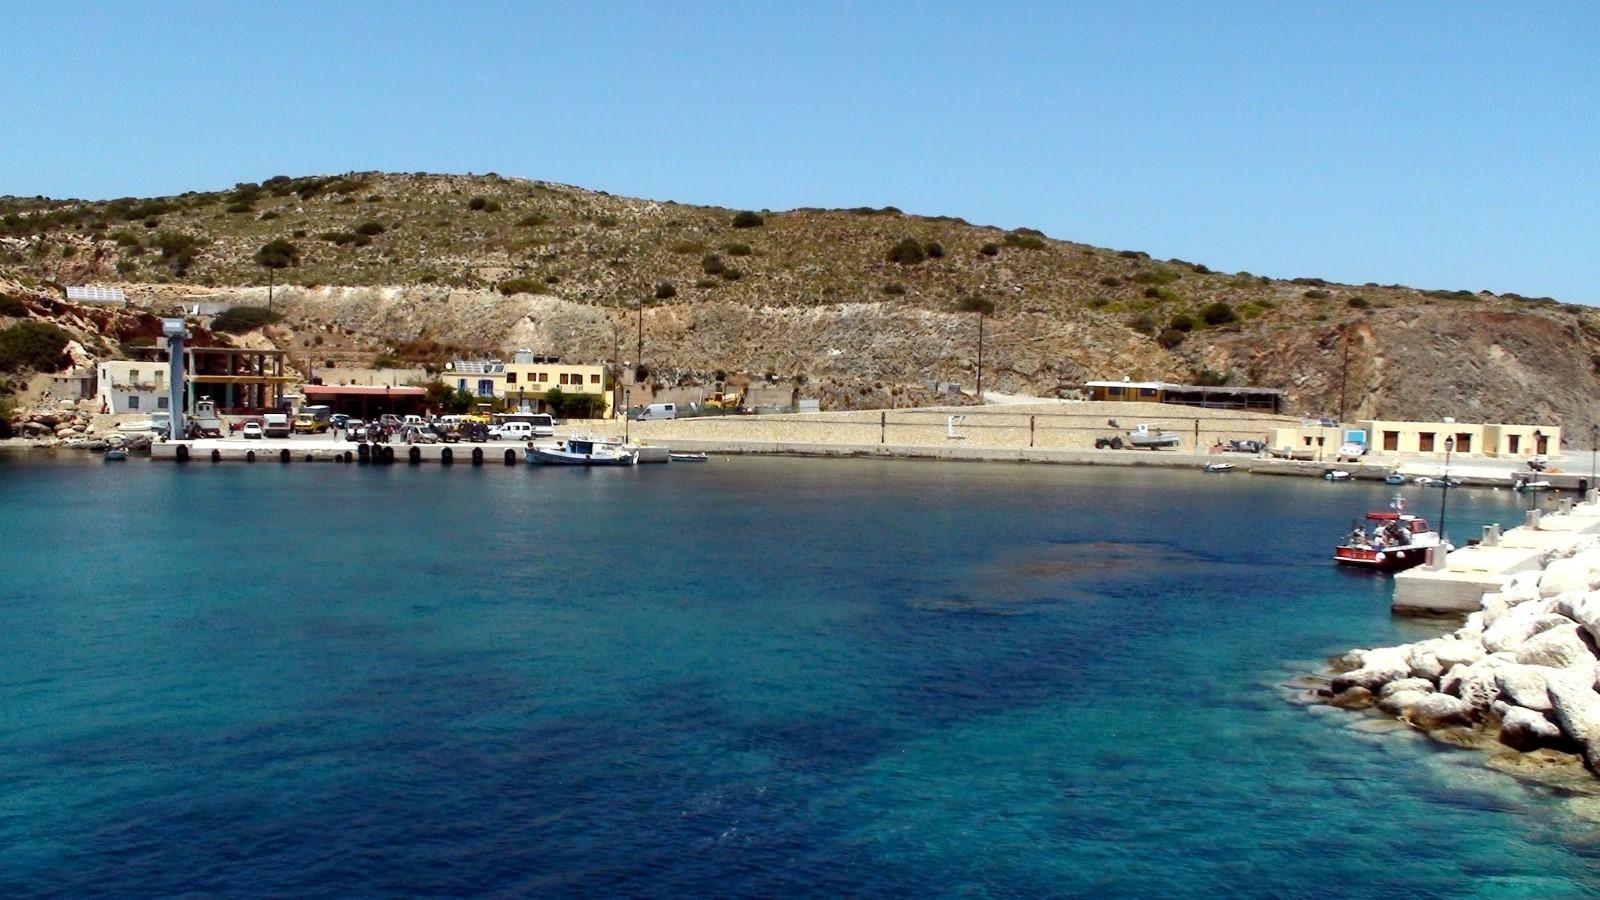 Karave: The port of Gavdos located in the east of the island. In Karave you will find rooms to let, taverns, cafeteria, car and motorbike rental office and a Mini Market.